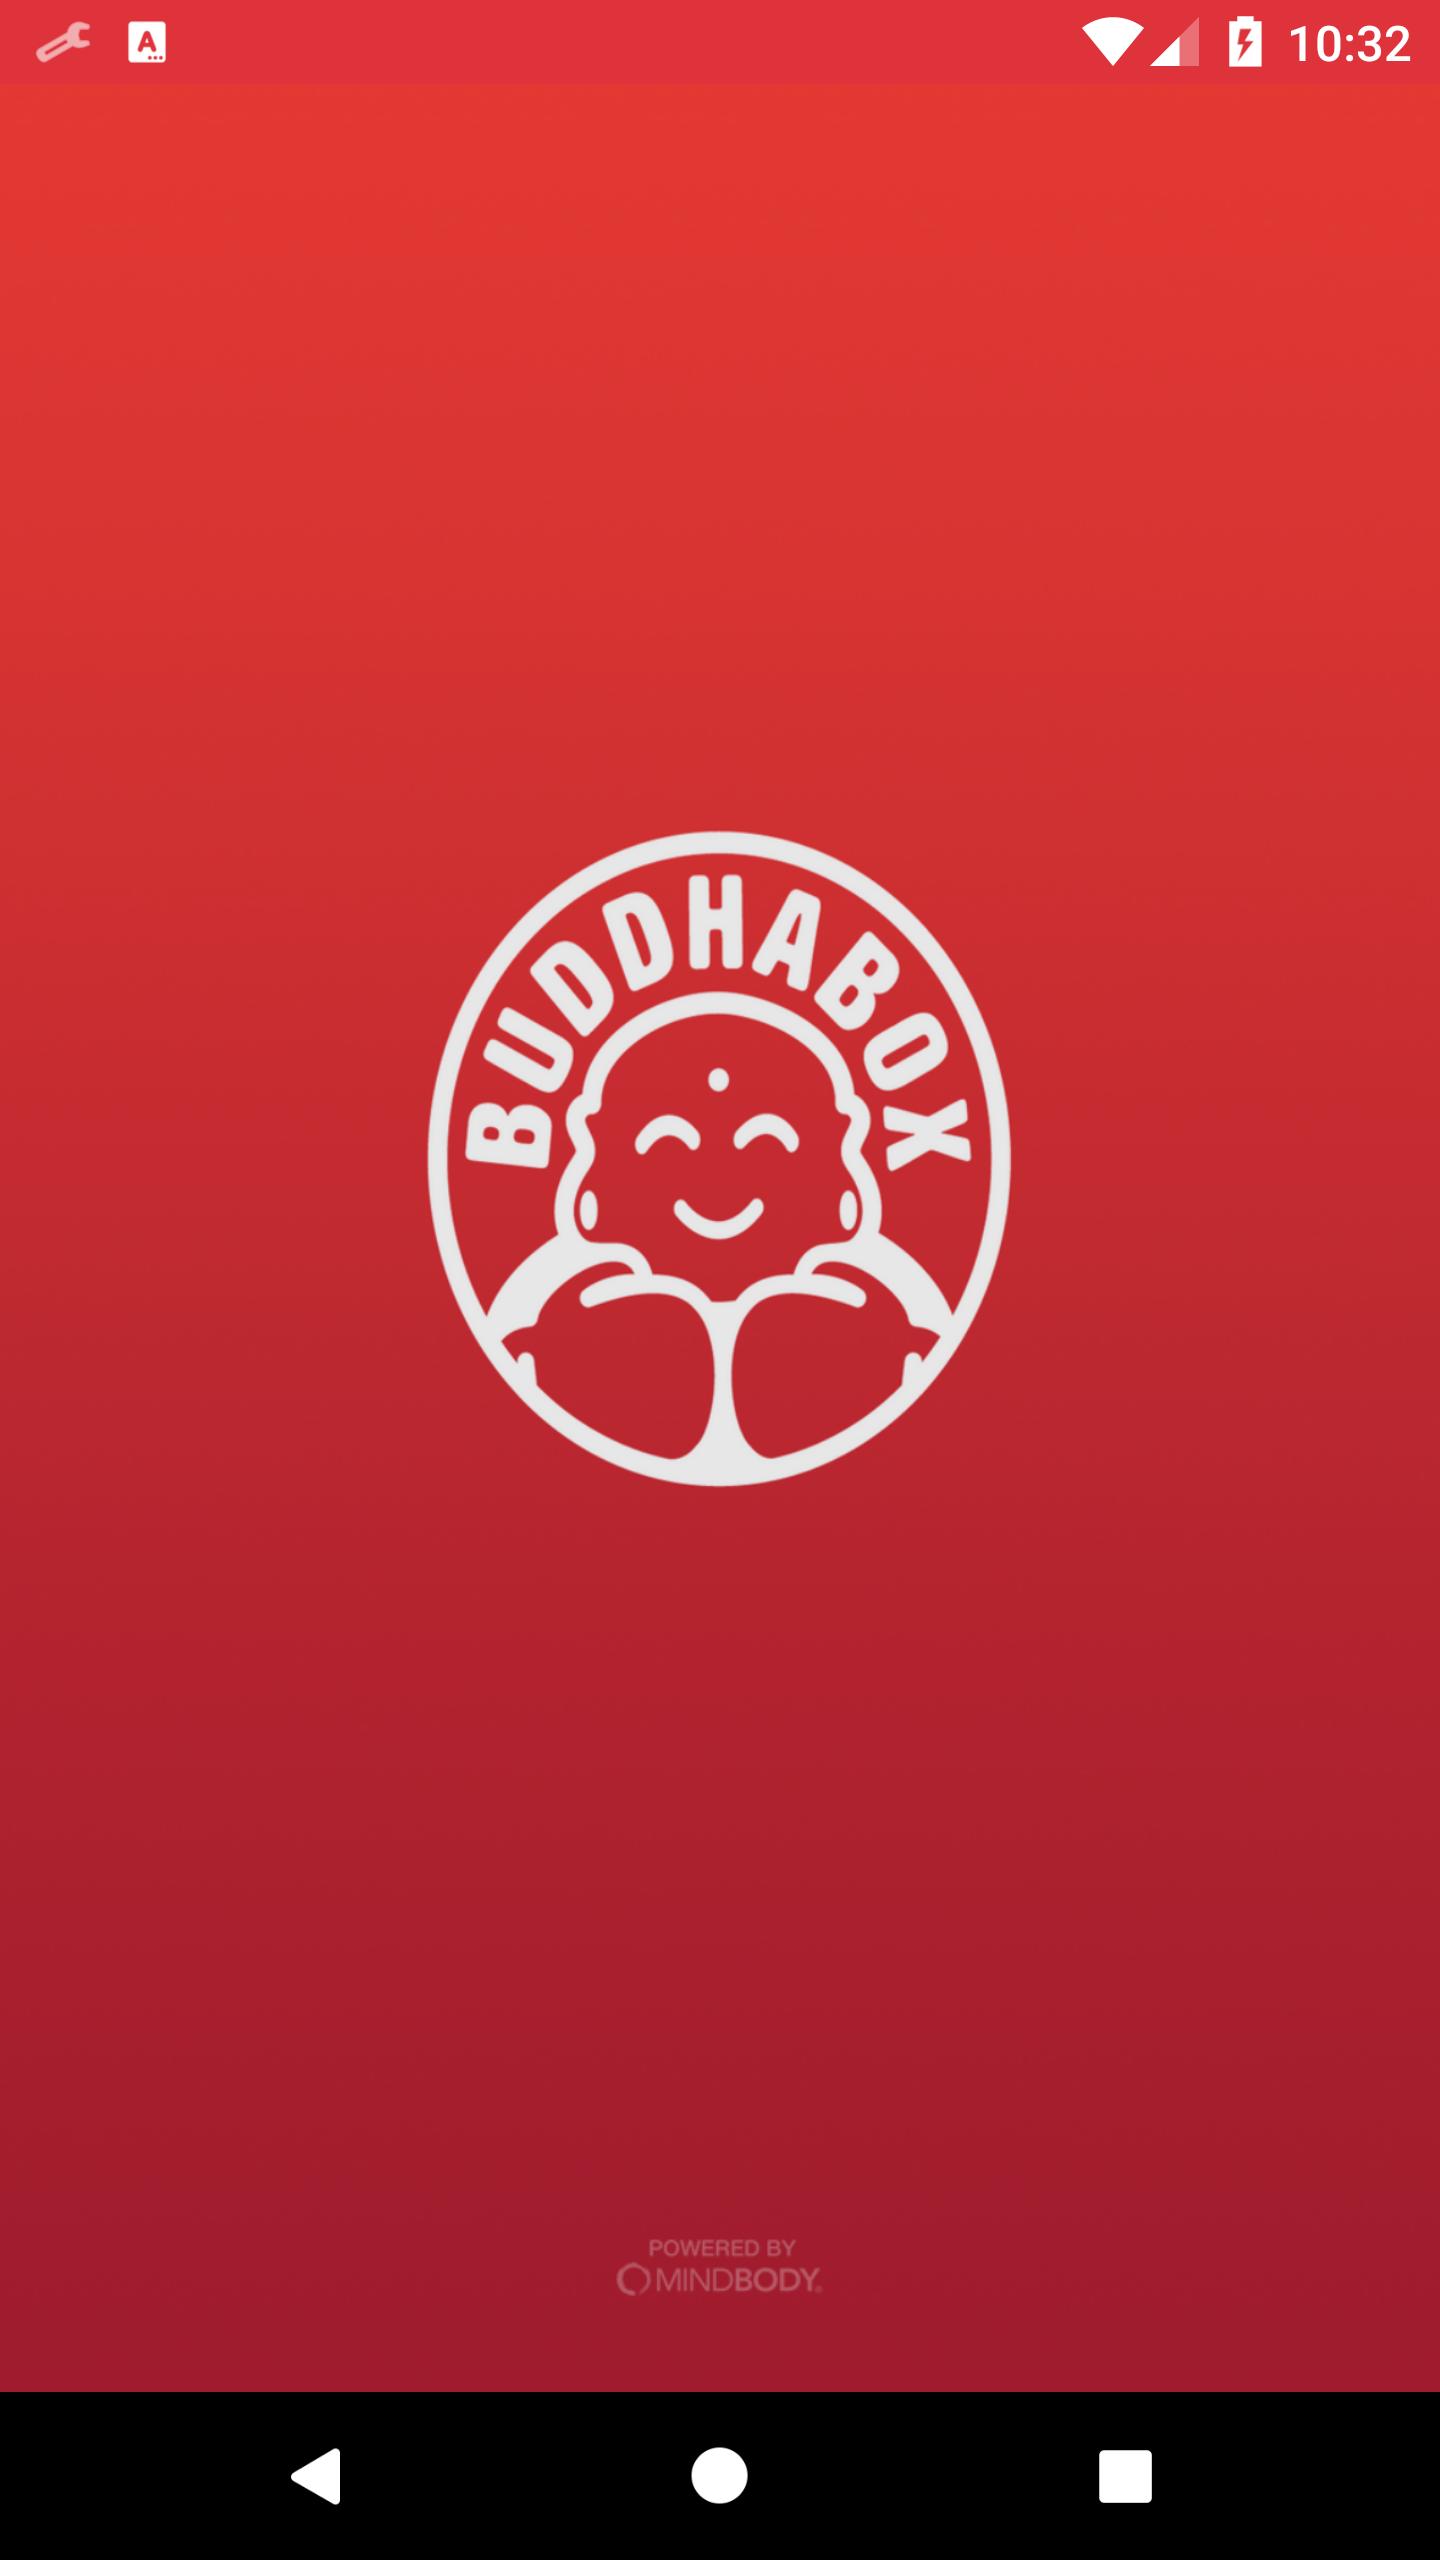 BuddhaBox-Boxing Yoga Movement for Android - APK Download